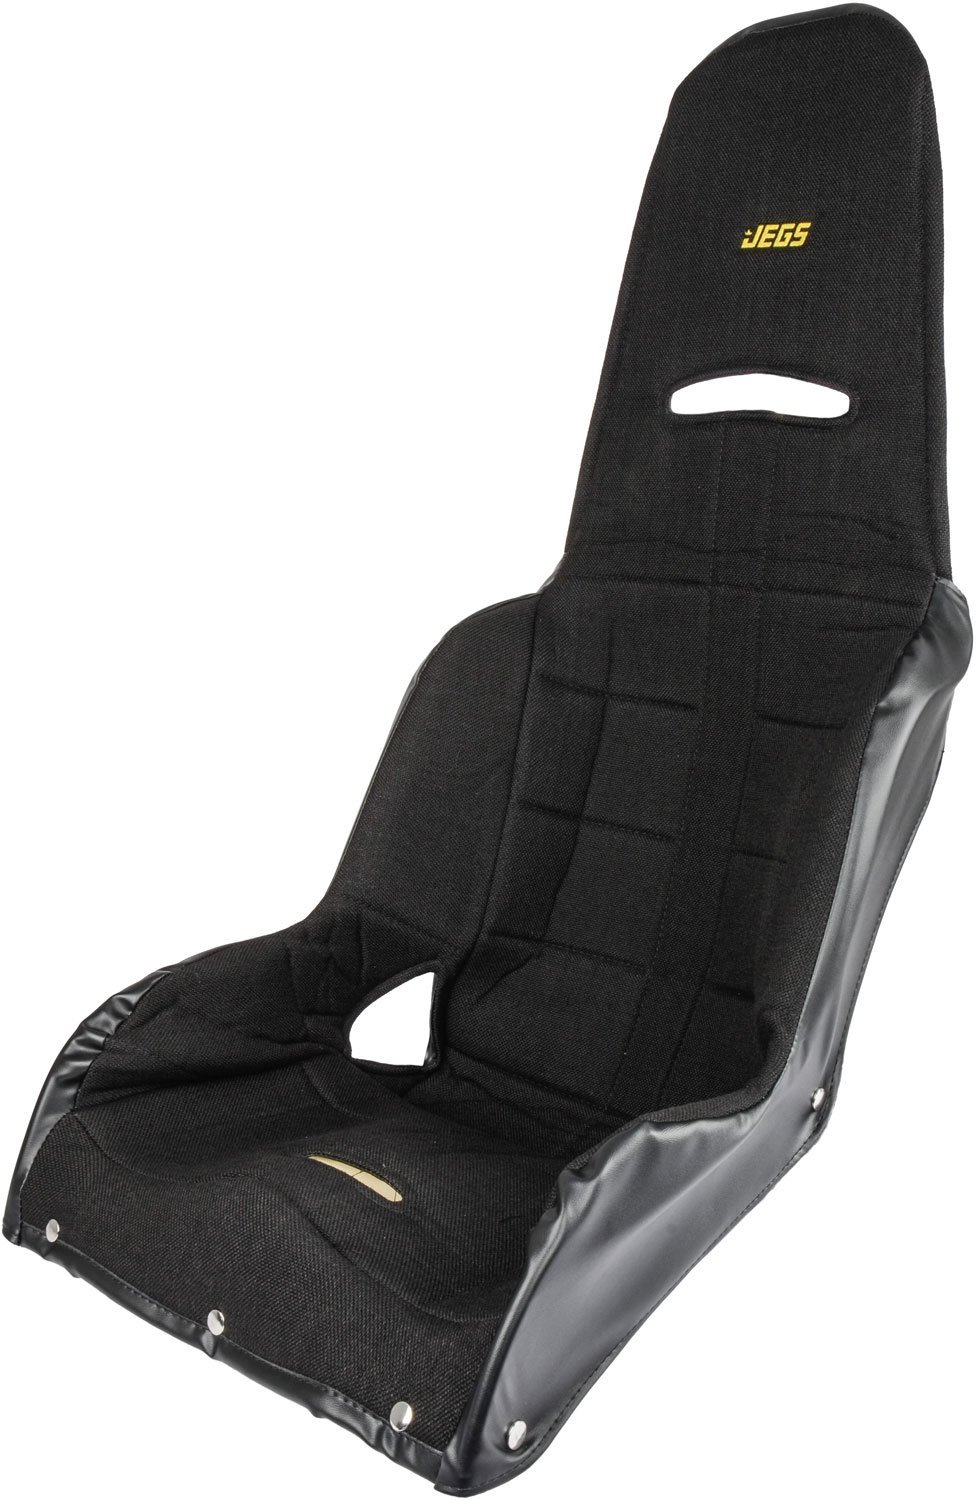 Racing Seat Cover 16